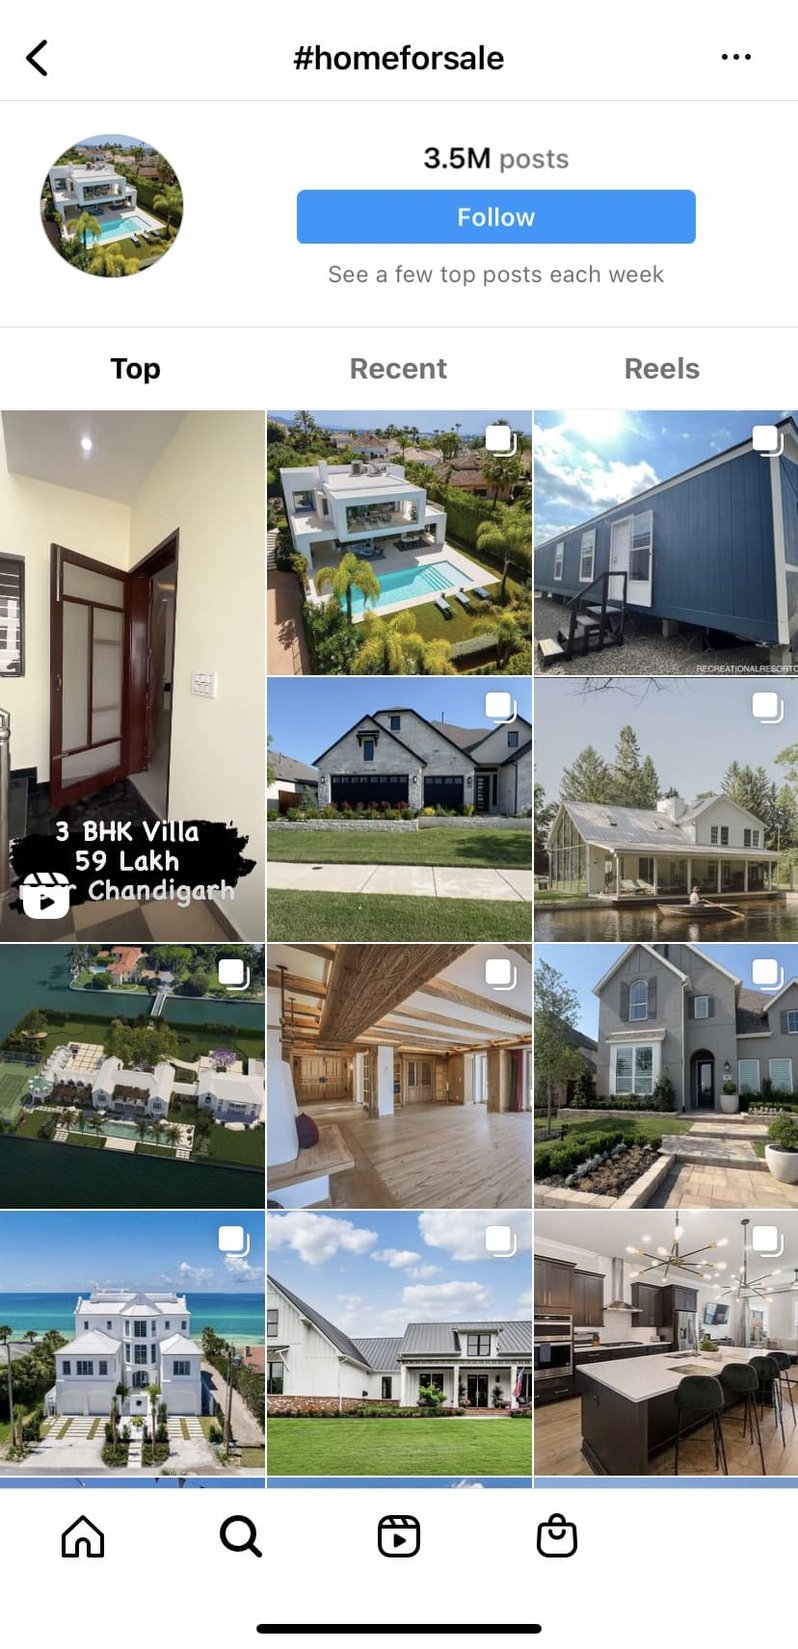 50 Real Estate Hashtags You Can Use to Capitalize on Your Online Presence